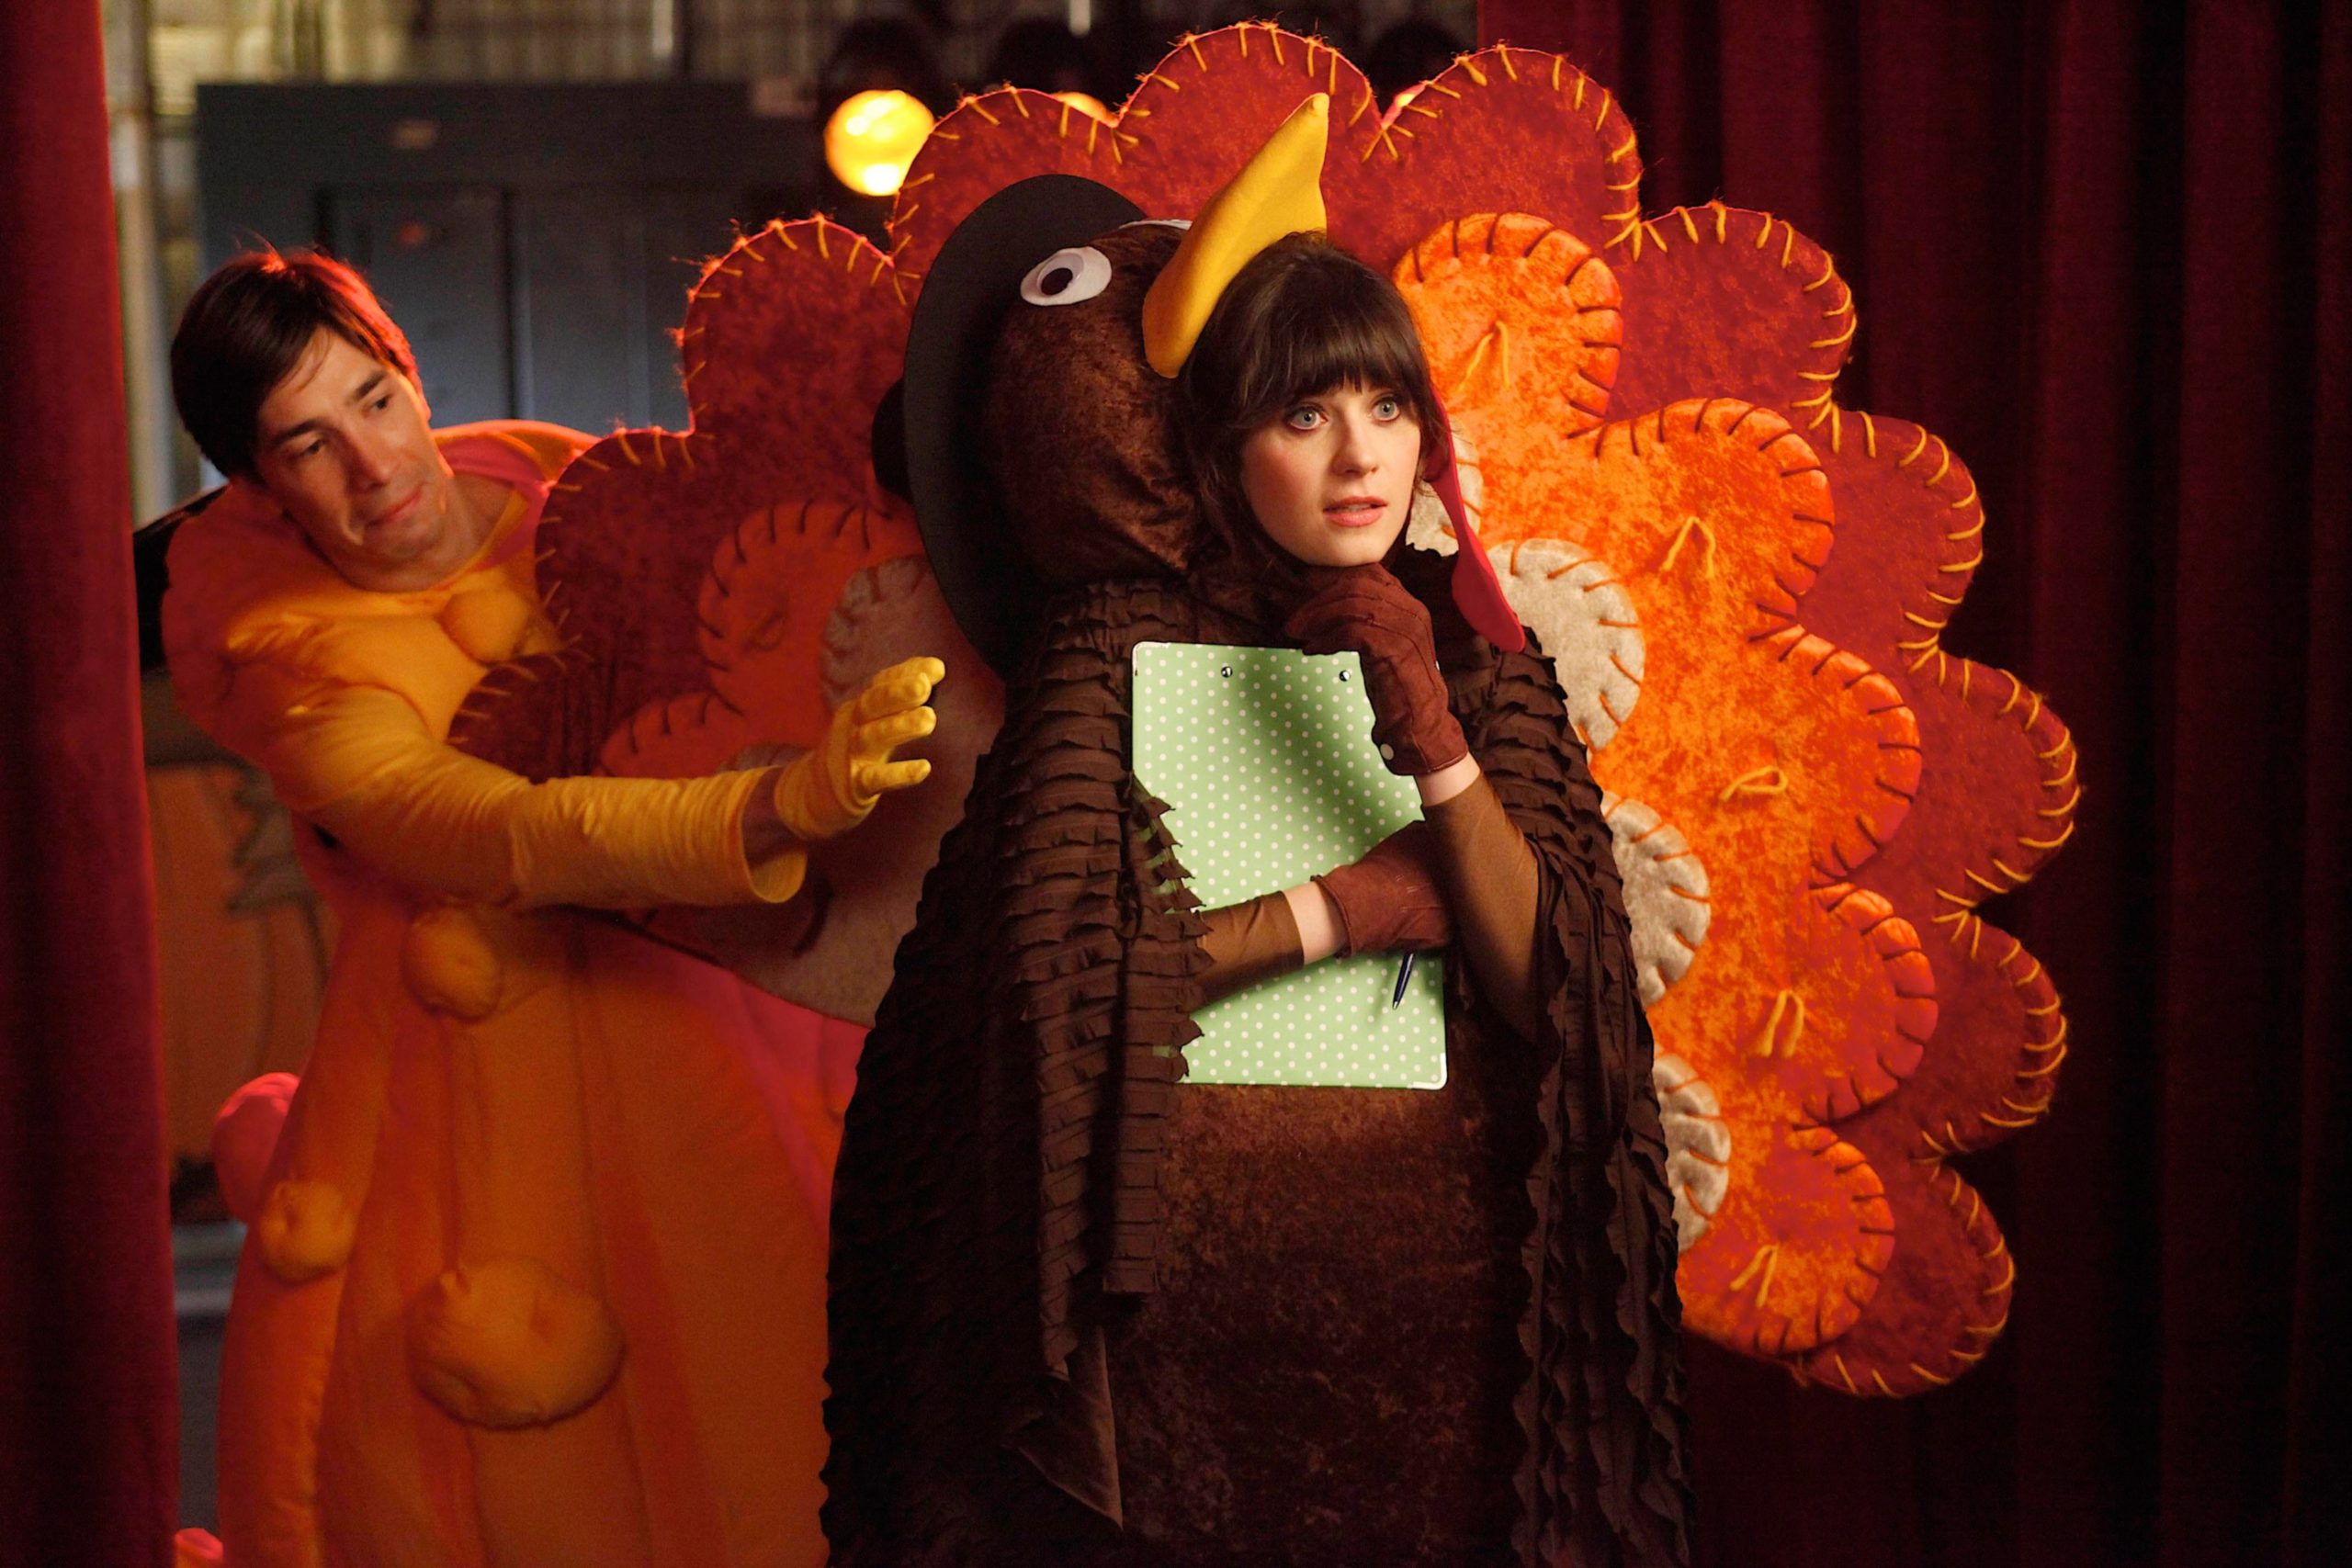 New Girl - Justin Long and Zooey Deschanel - 'Thanksgiving'